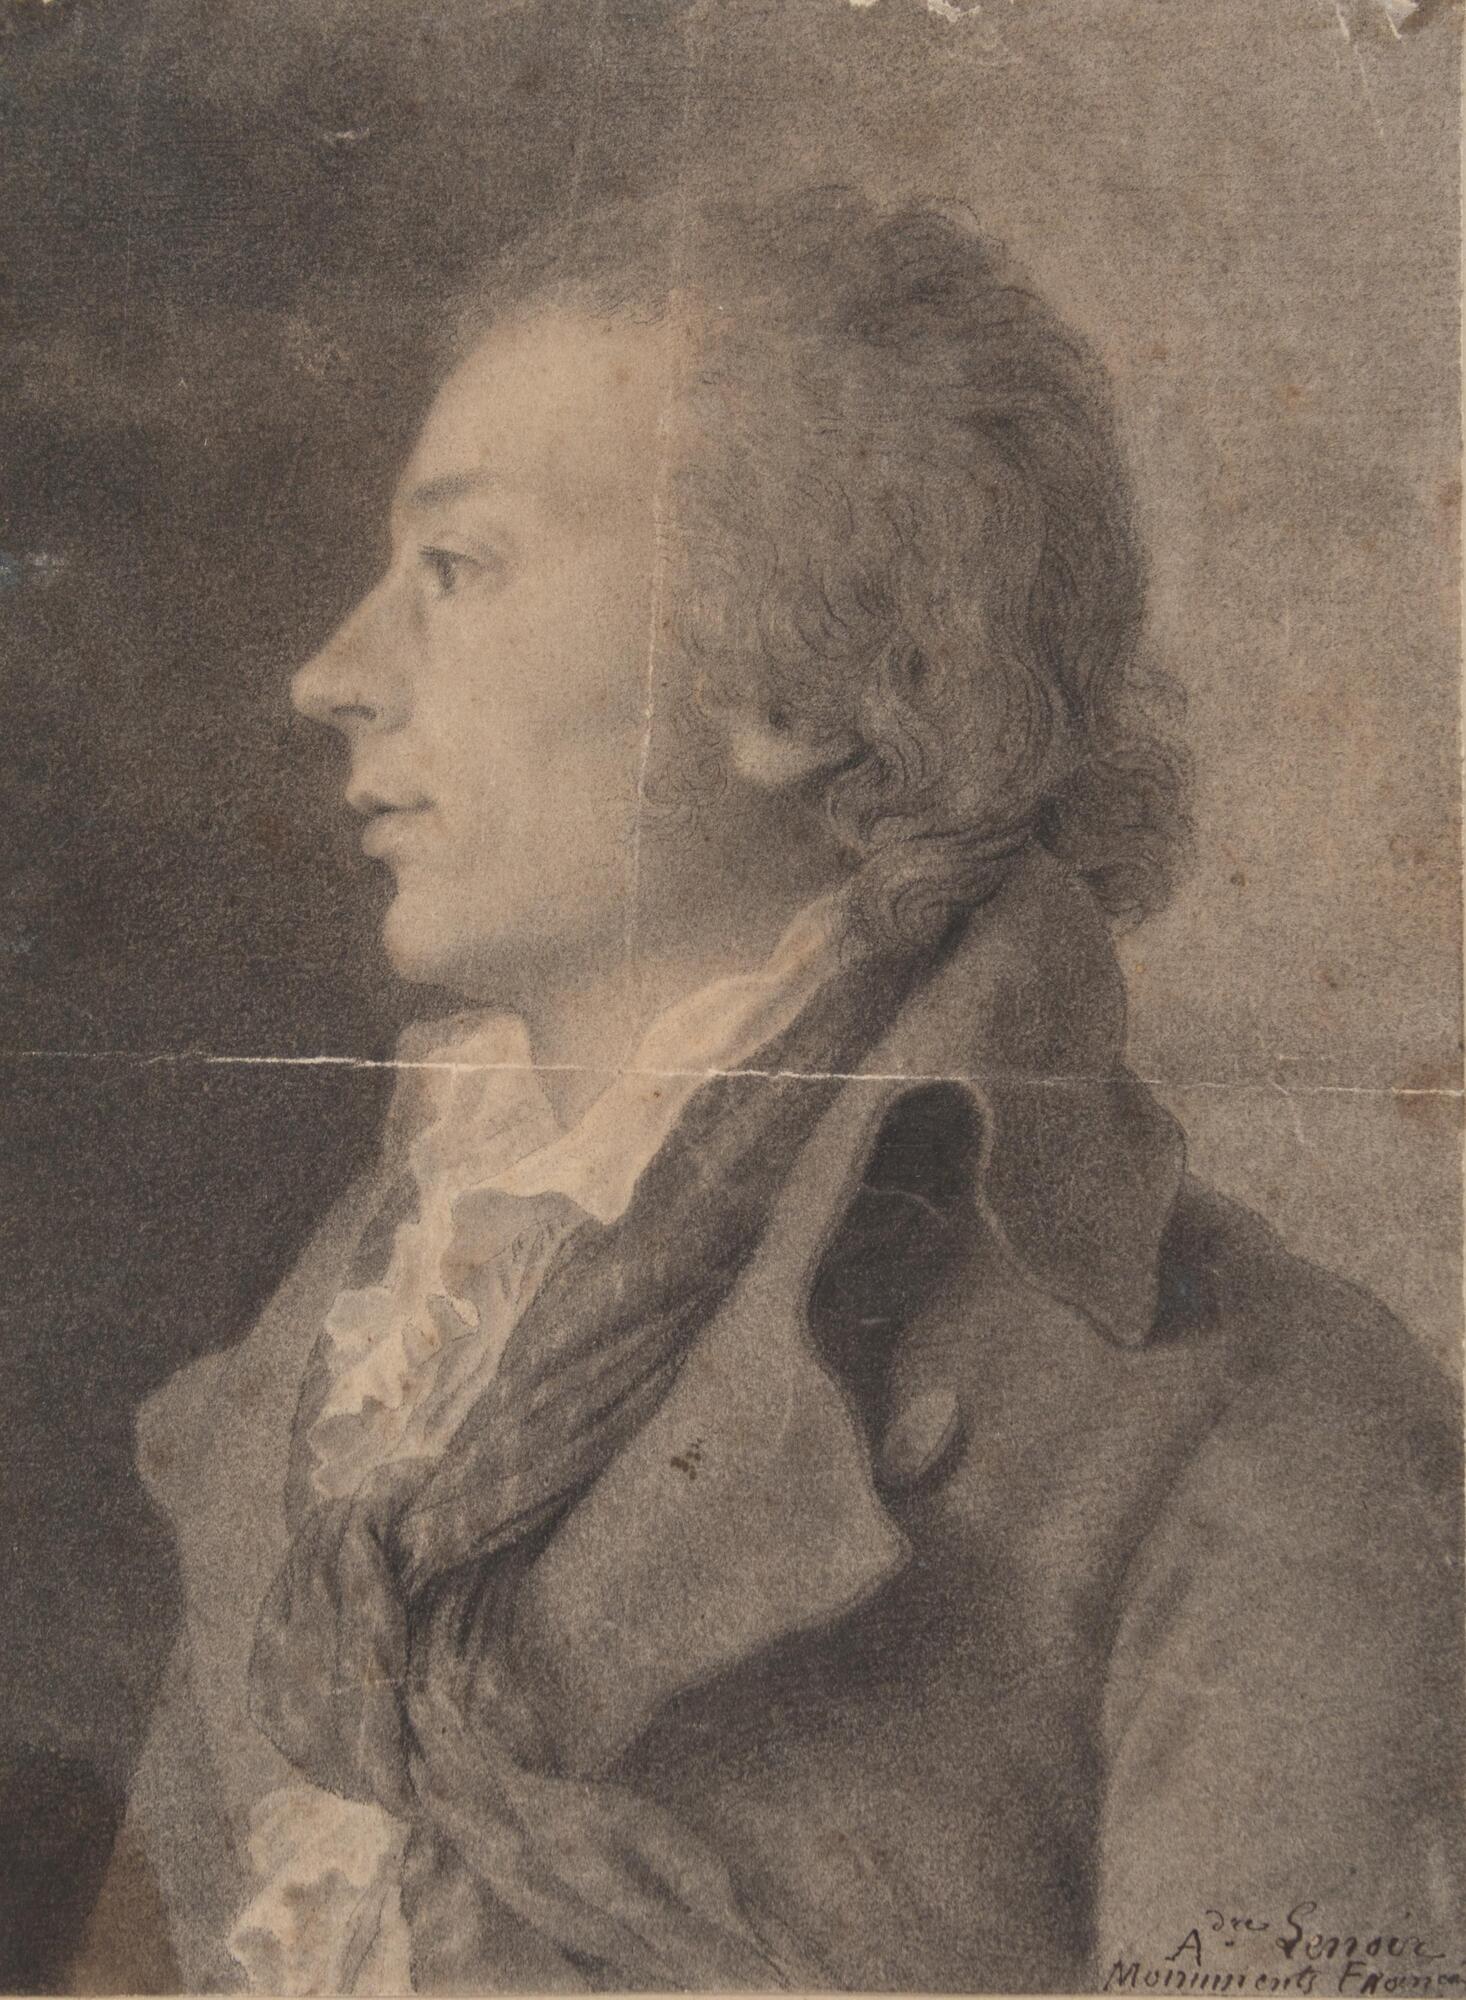 A side profile of a young man wearing traditional colonial dress with ruffled collar and scarf. He is seated to the left.